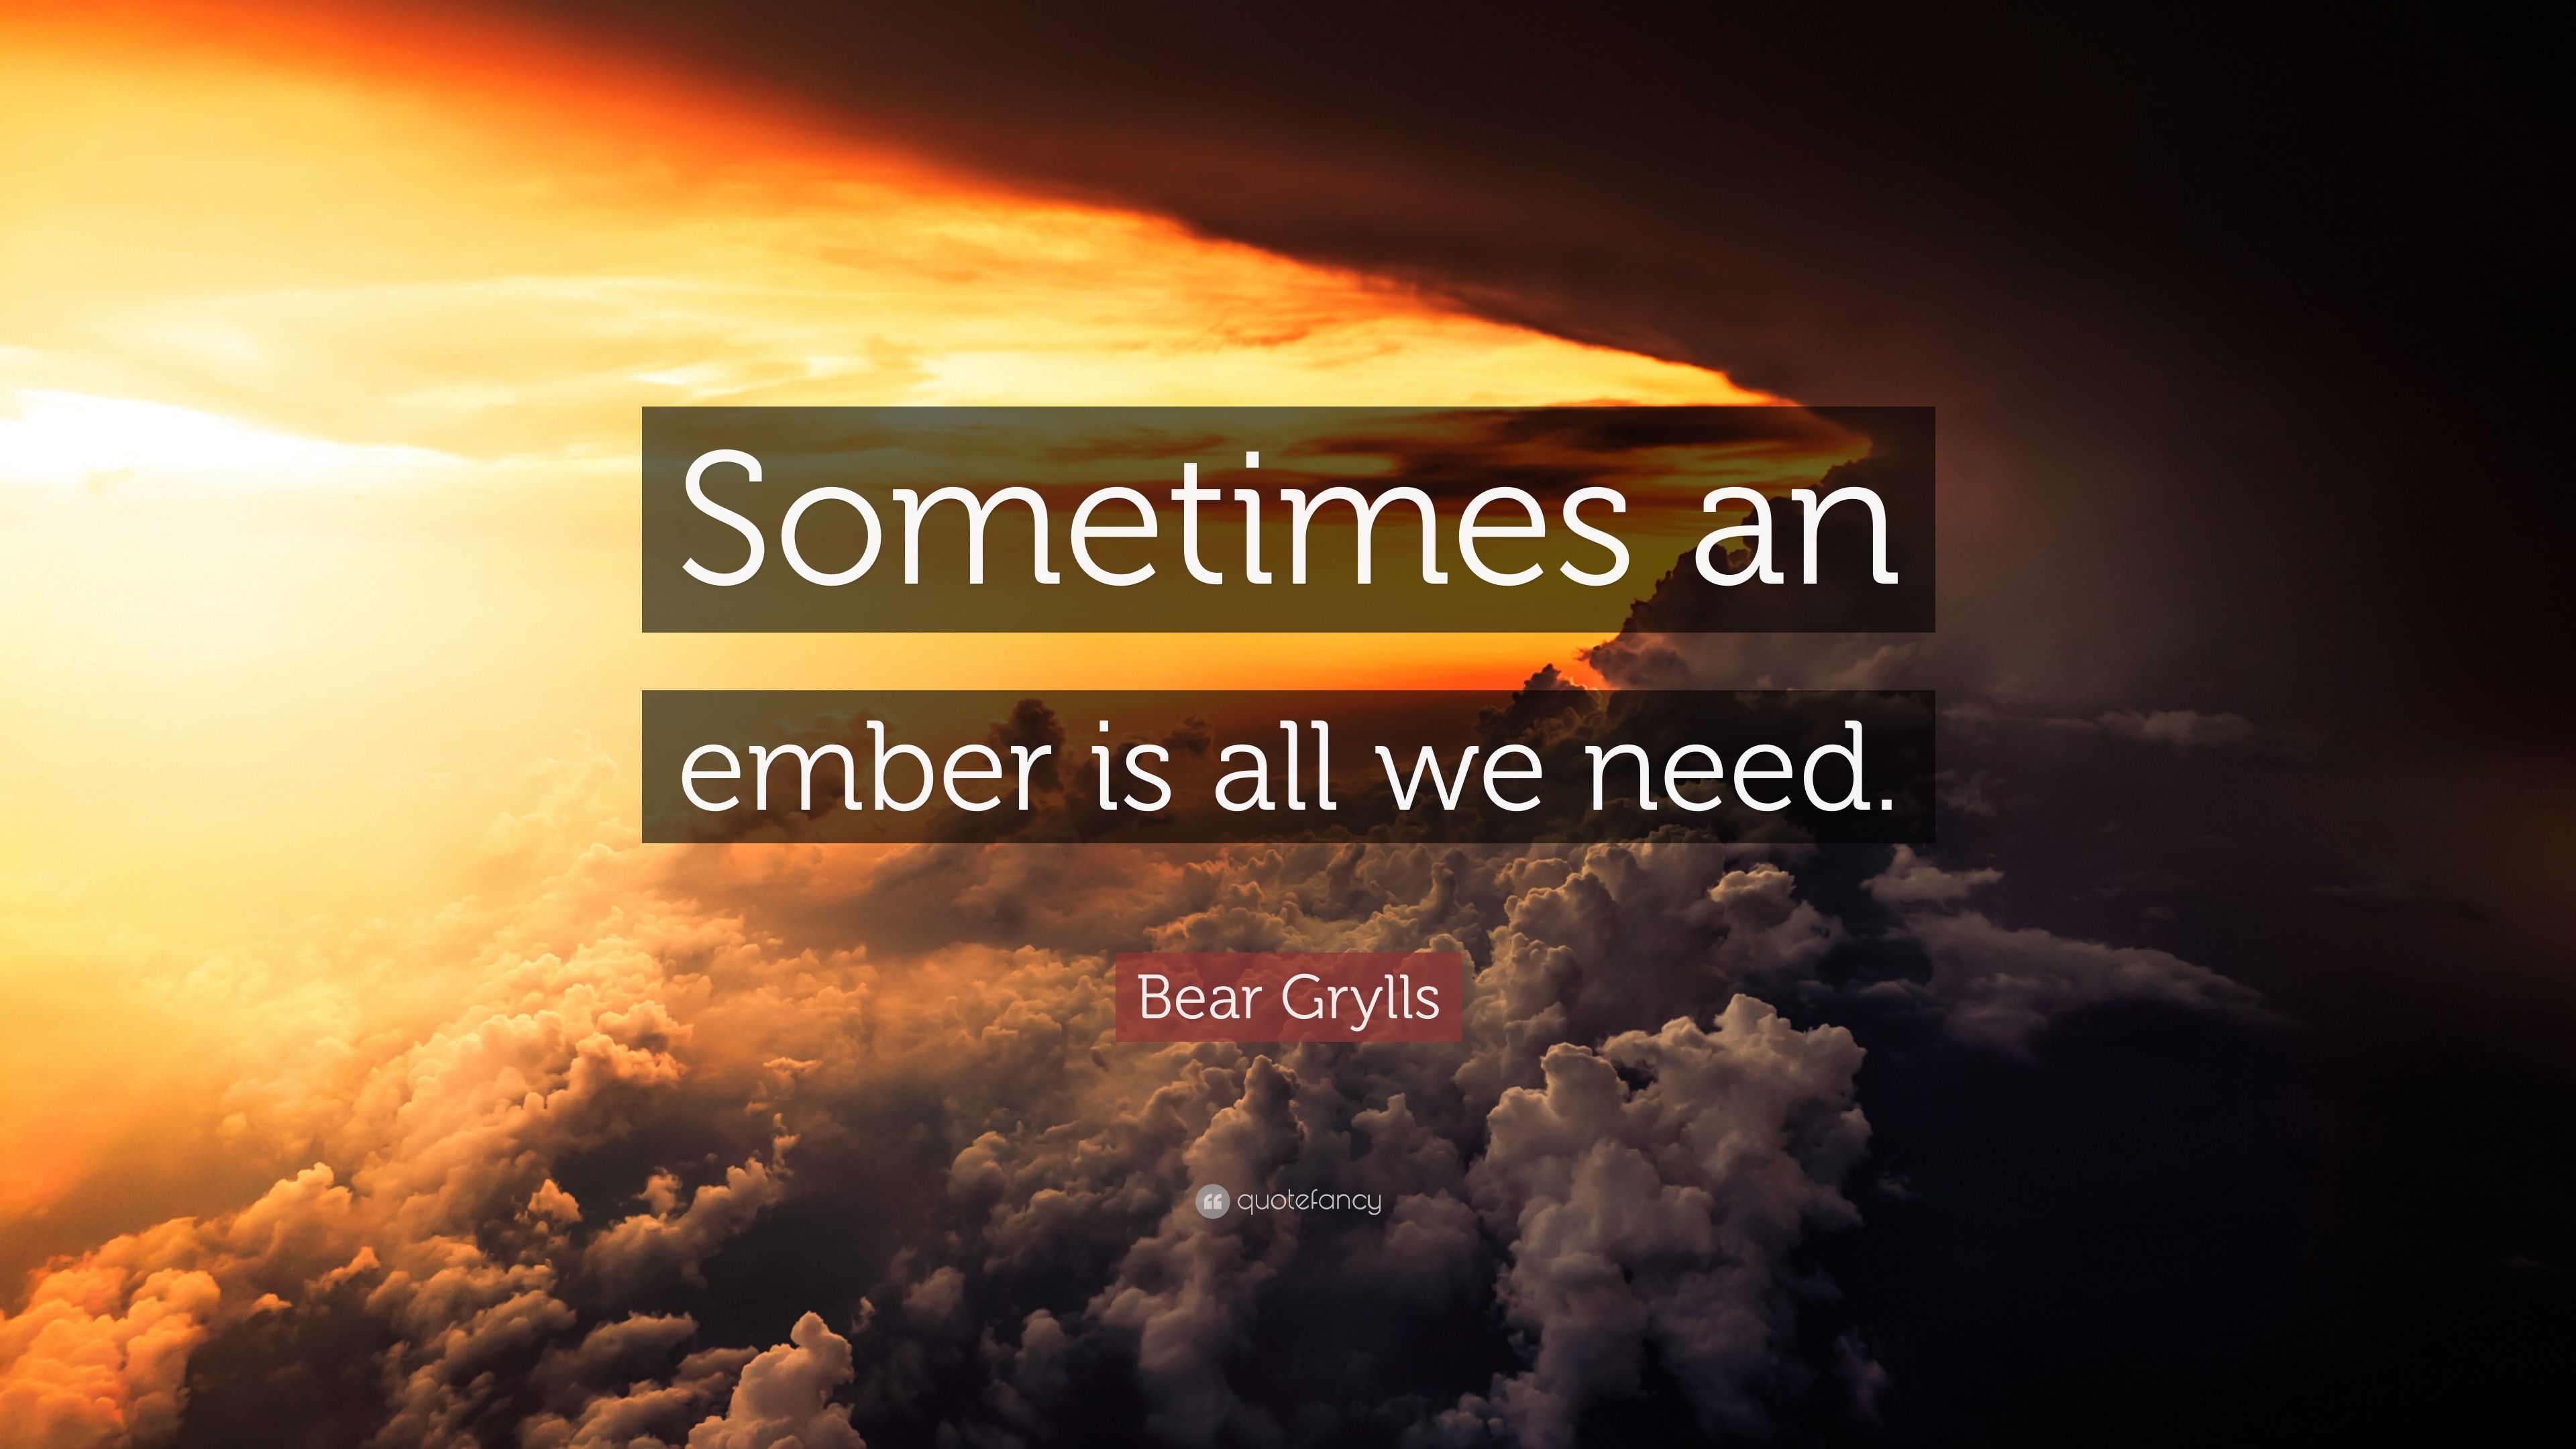 Bear Grylls Quote: “Sometimes an ember is all we need.”